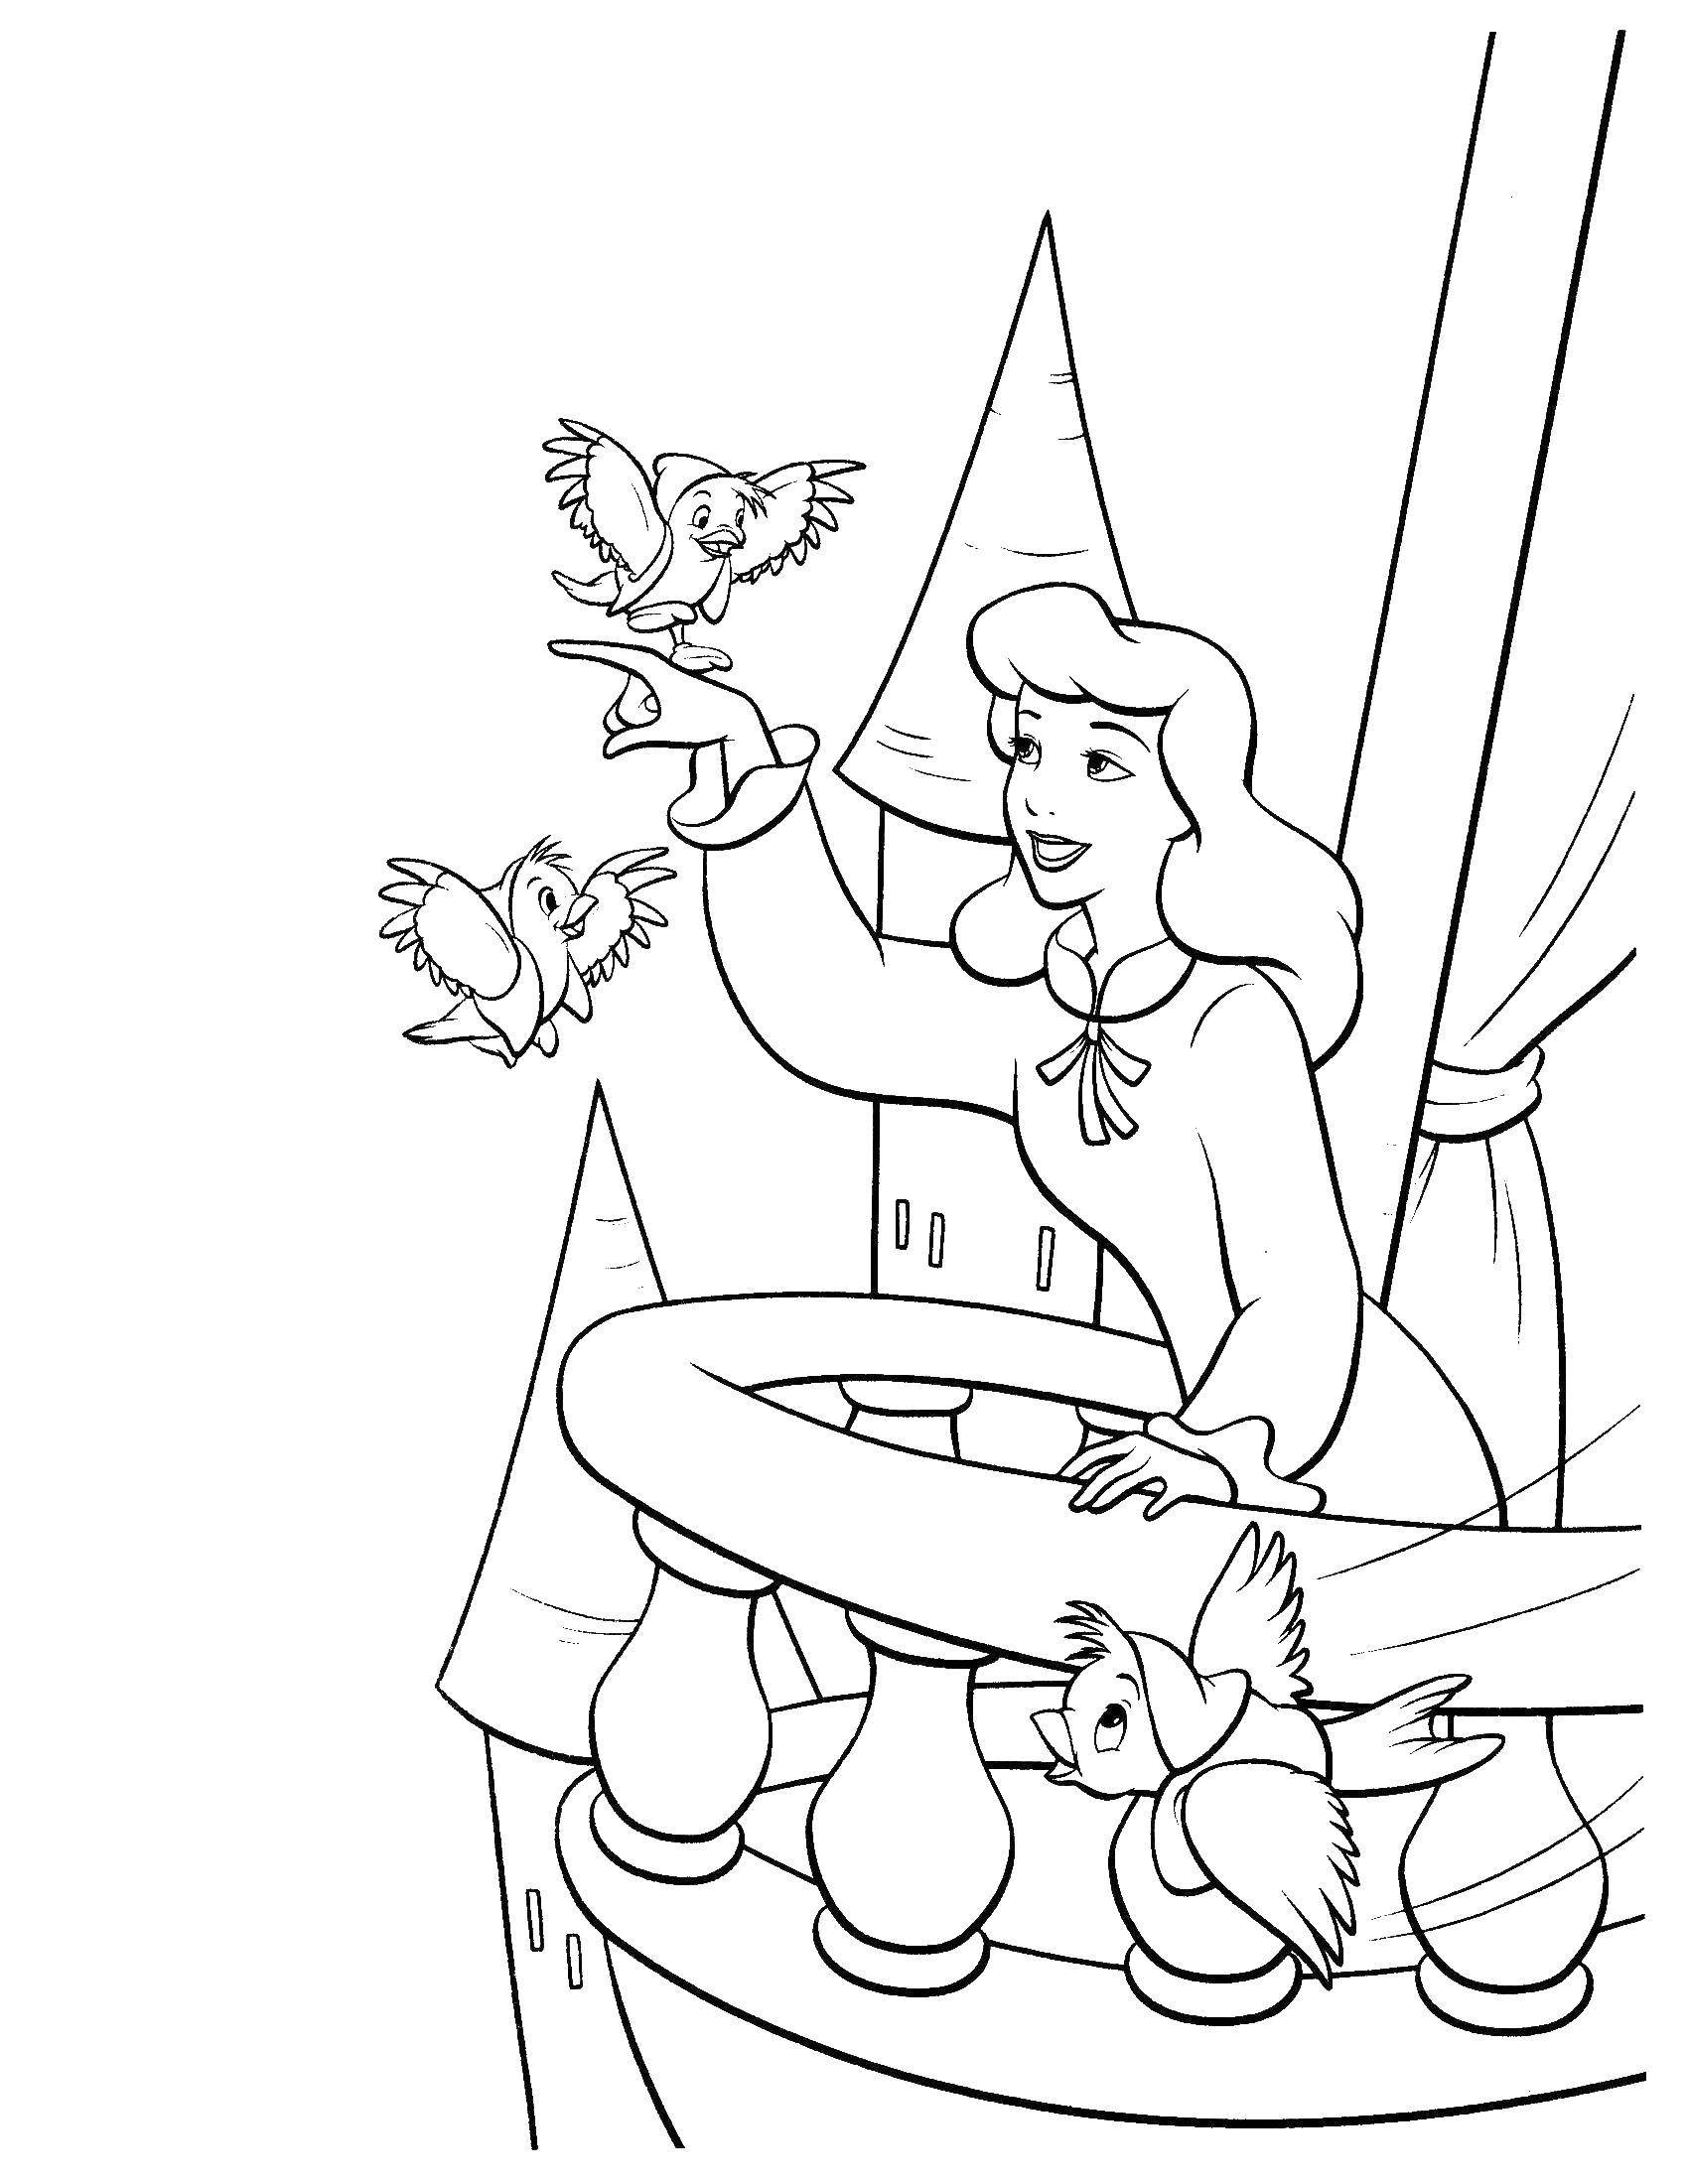 Coloring Sleeping beauty from dispelga cartoon. Category Disney coloring pages. Tags:  Disney, Sleeping beauty.